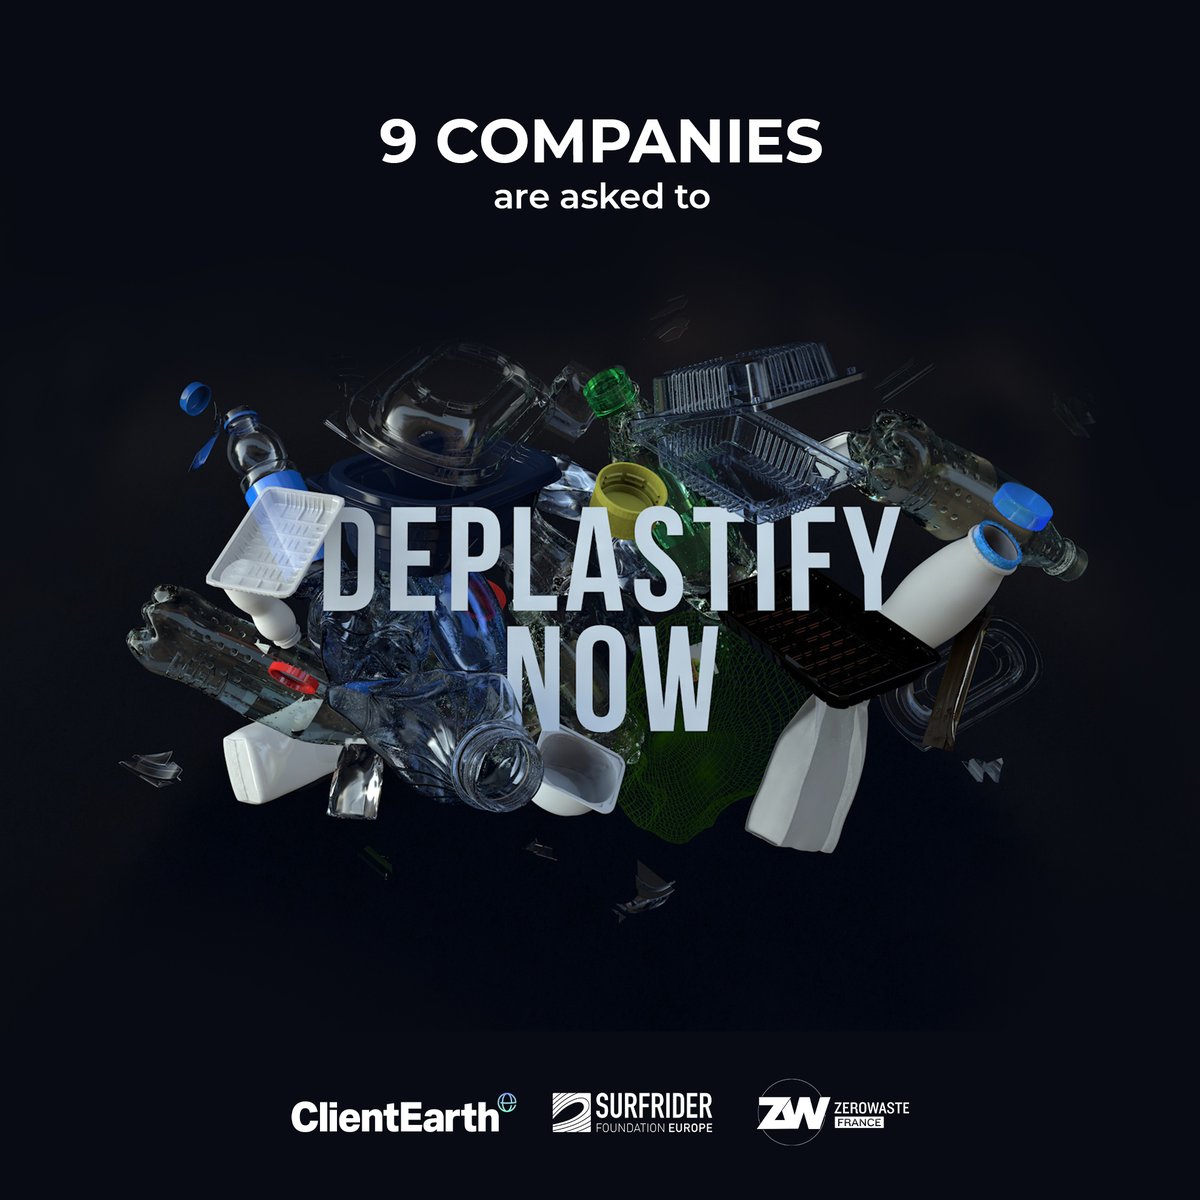 We're putting McDonald's, Nestlé and 7 other companies on formal notice to reduce their plastic use. These companies are responsible for vast amounts of plastics entering the environment. They need to #deplastifynow – or they could face legal action. 
clientearth.org/latest/latest-…